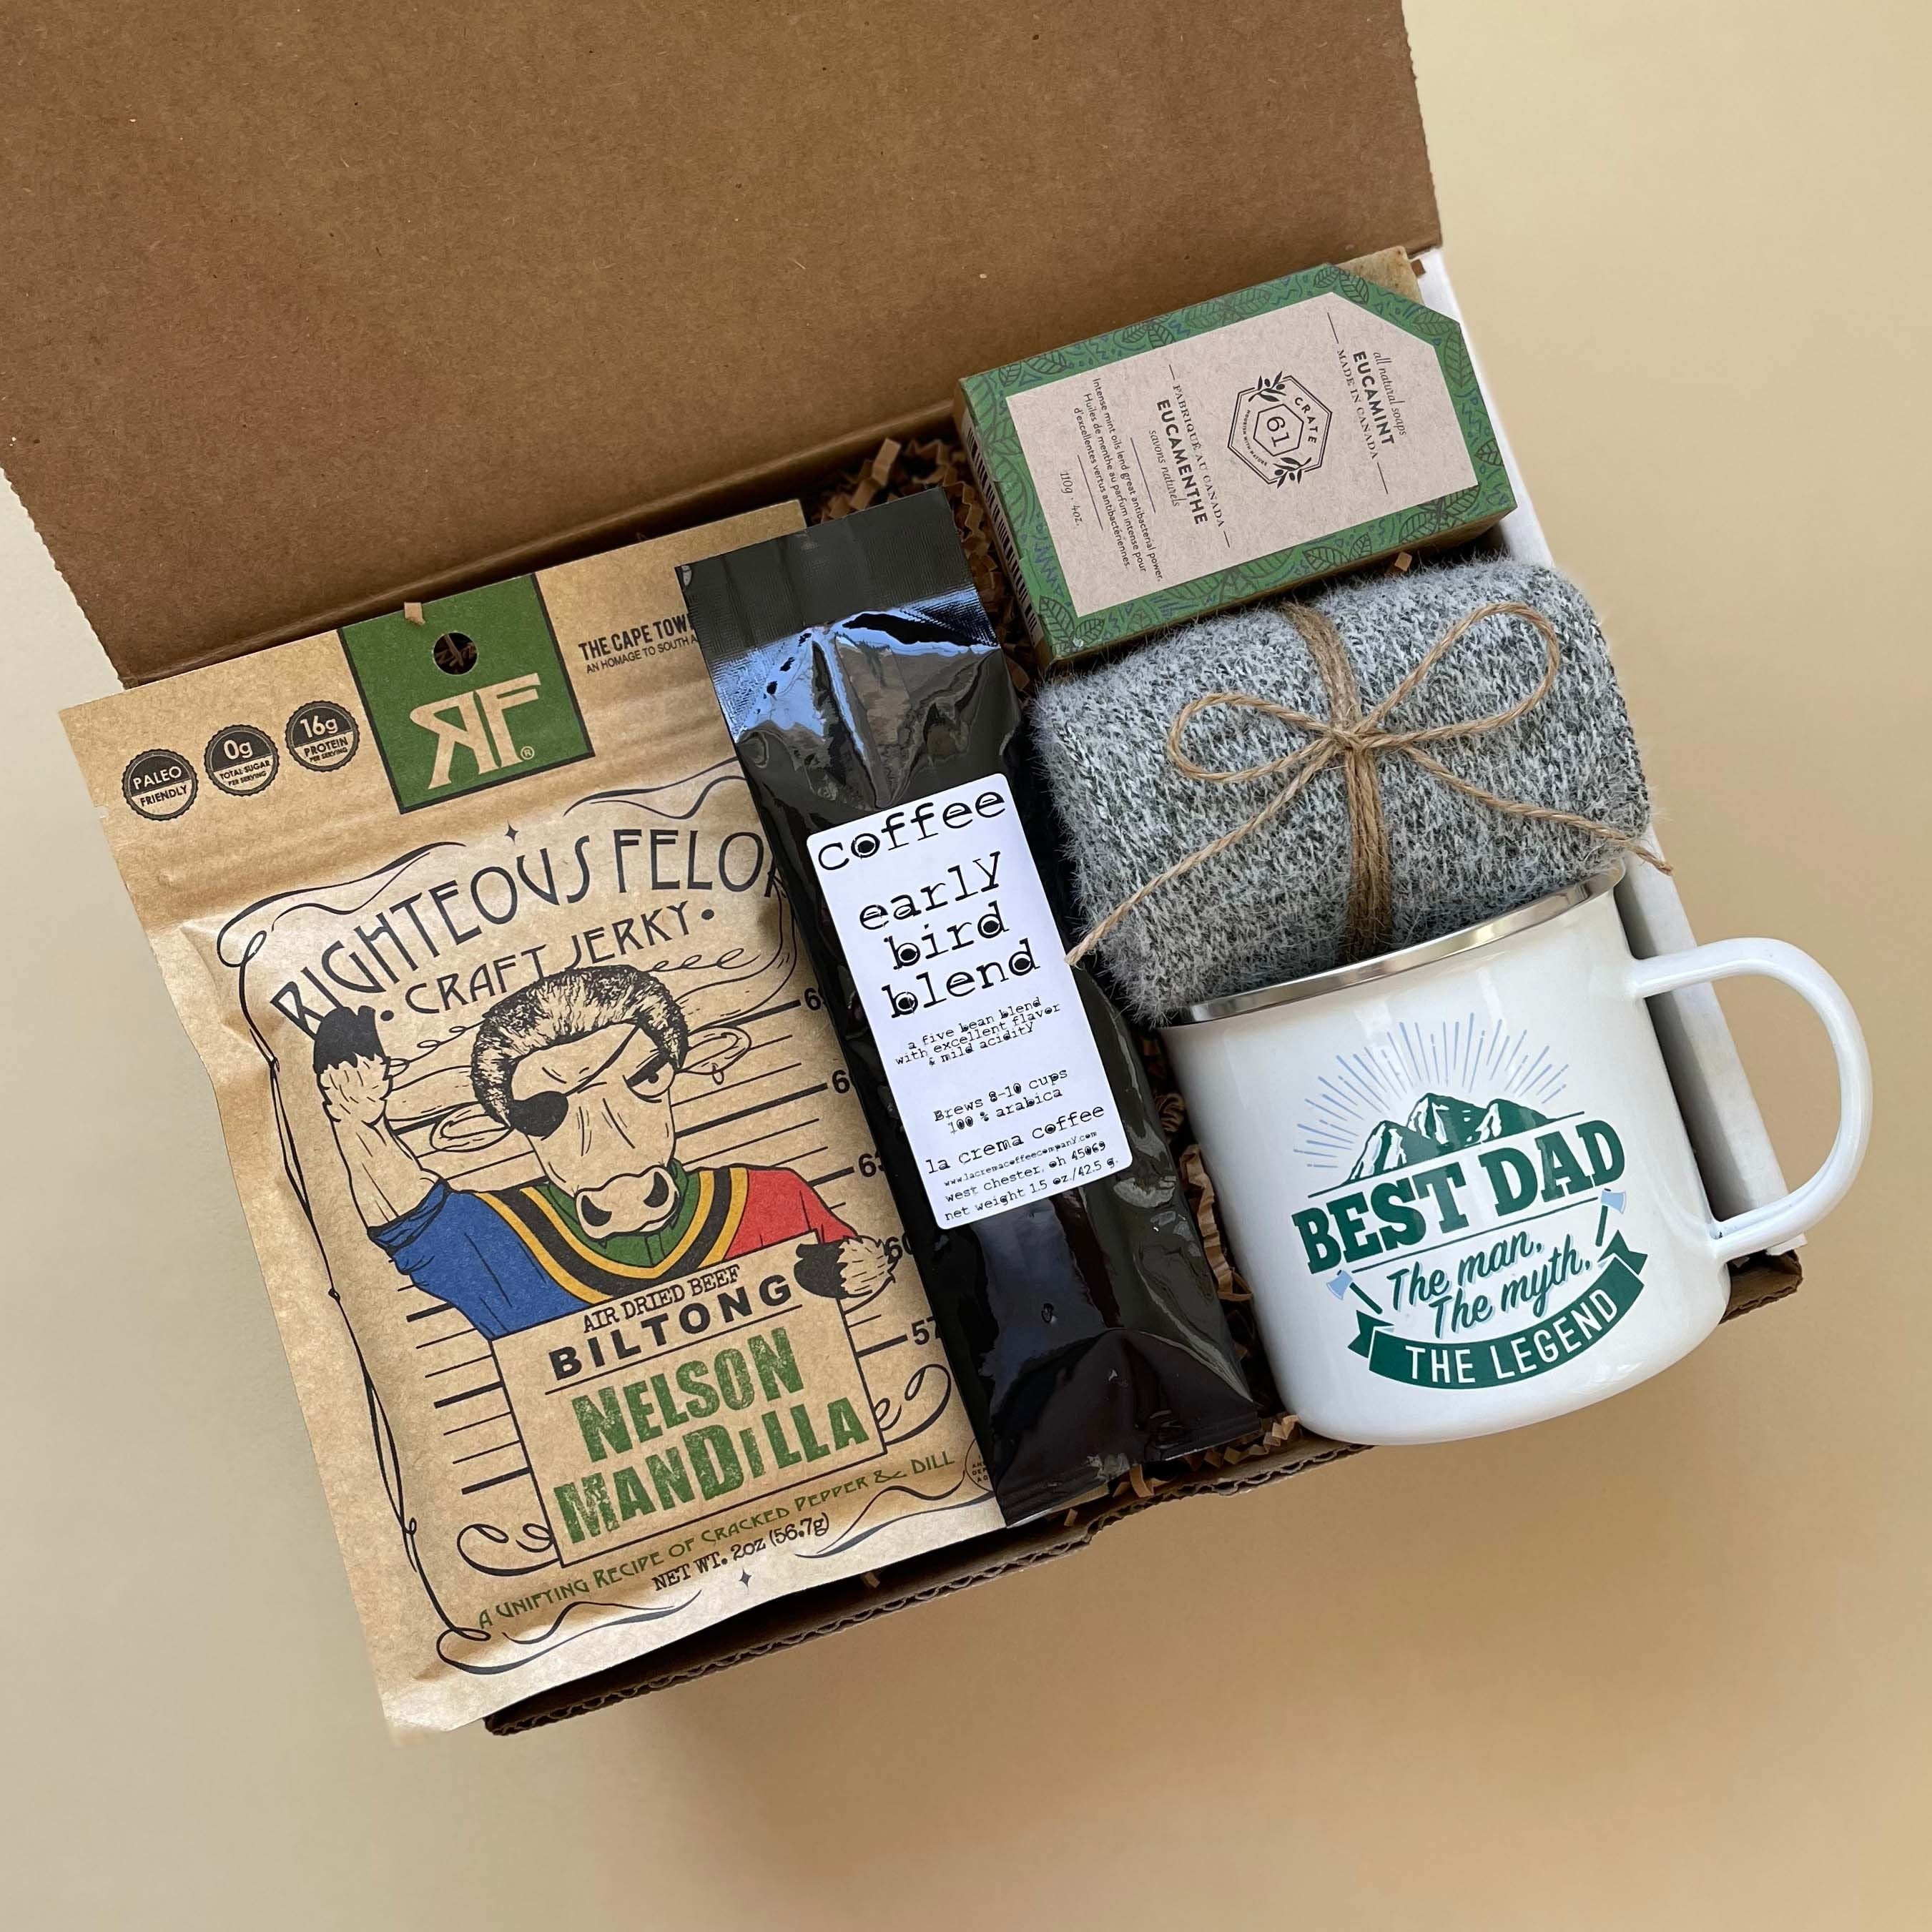  Gift Box for Men - Birthday Gifts, Gift Baskets, Unique  Presents for Him - Camping Gift Sets for Guys, Son, Brother, Boyfriend,  Dad, Husband, Friend : Sports & Outdoors